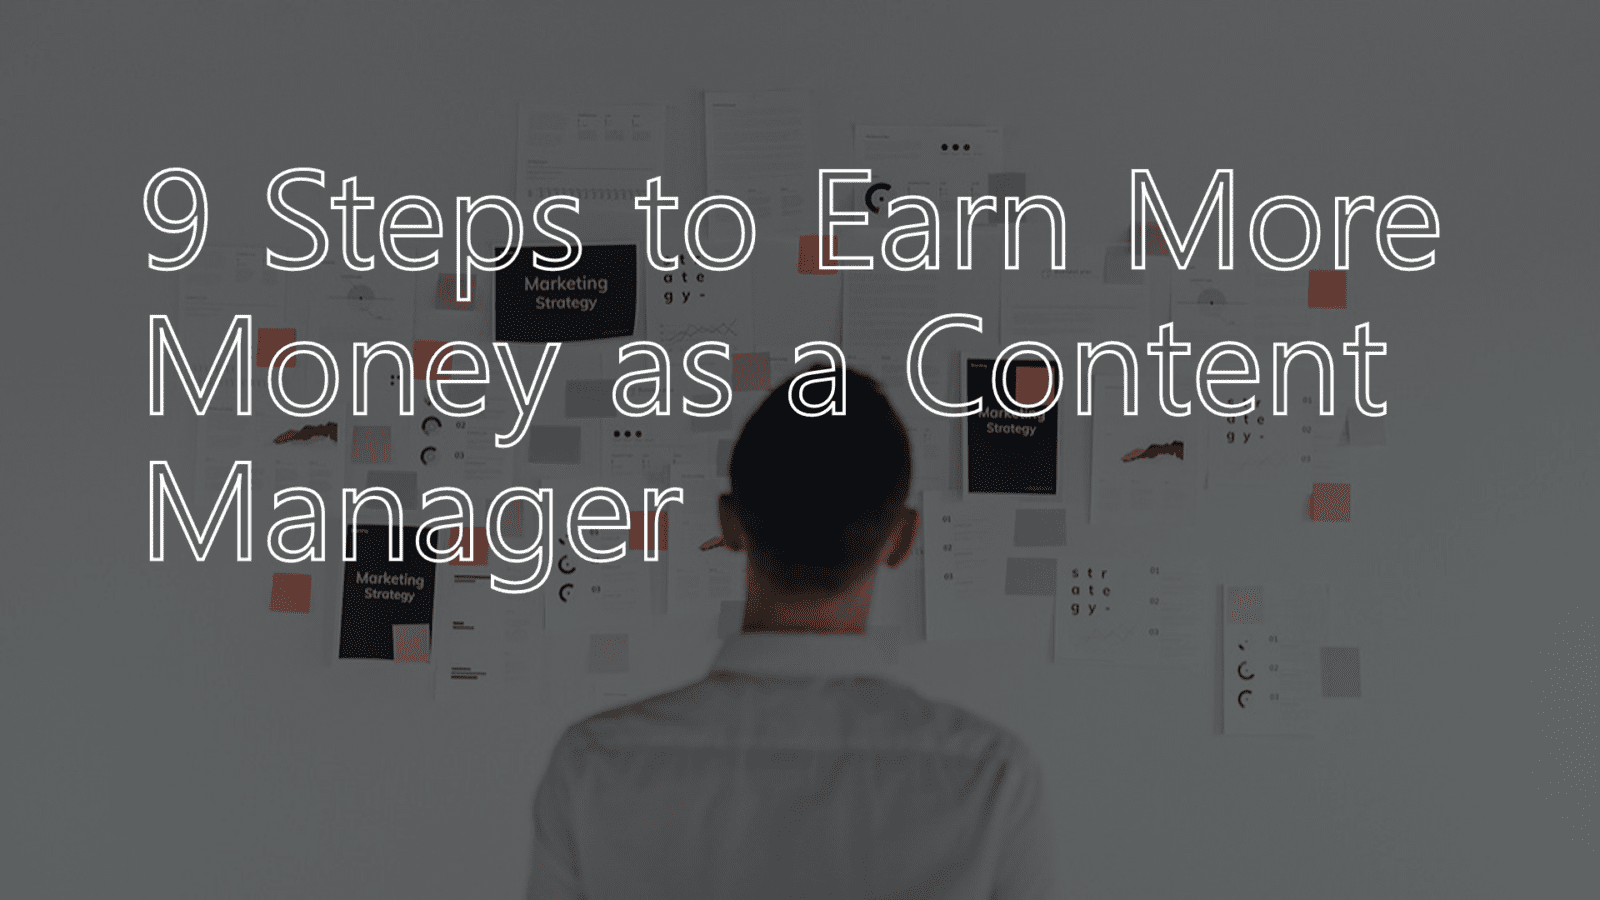 9 Steps to Earn More Money as a Content Manager